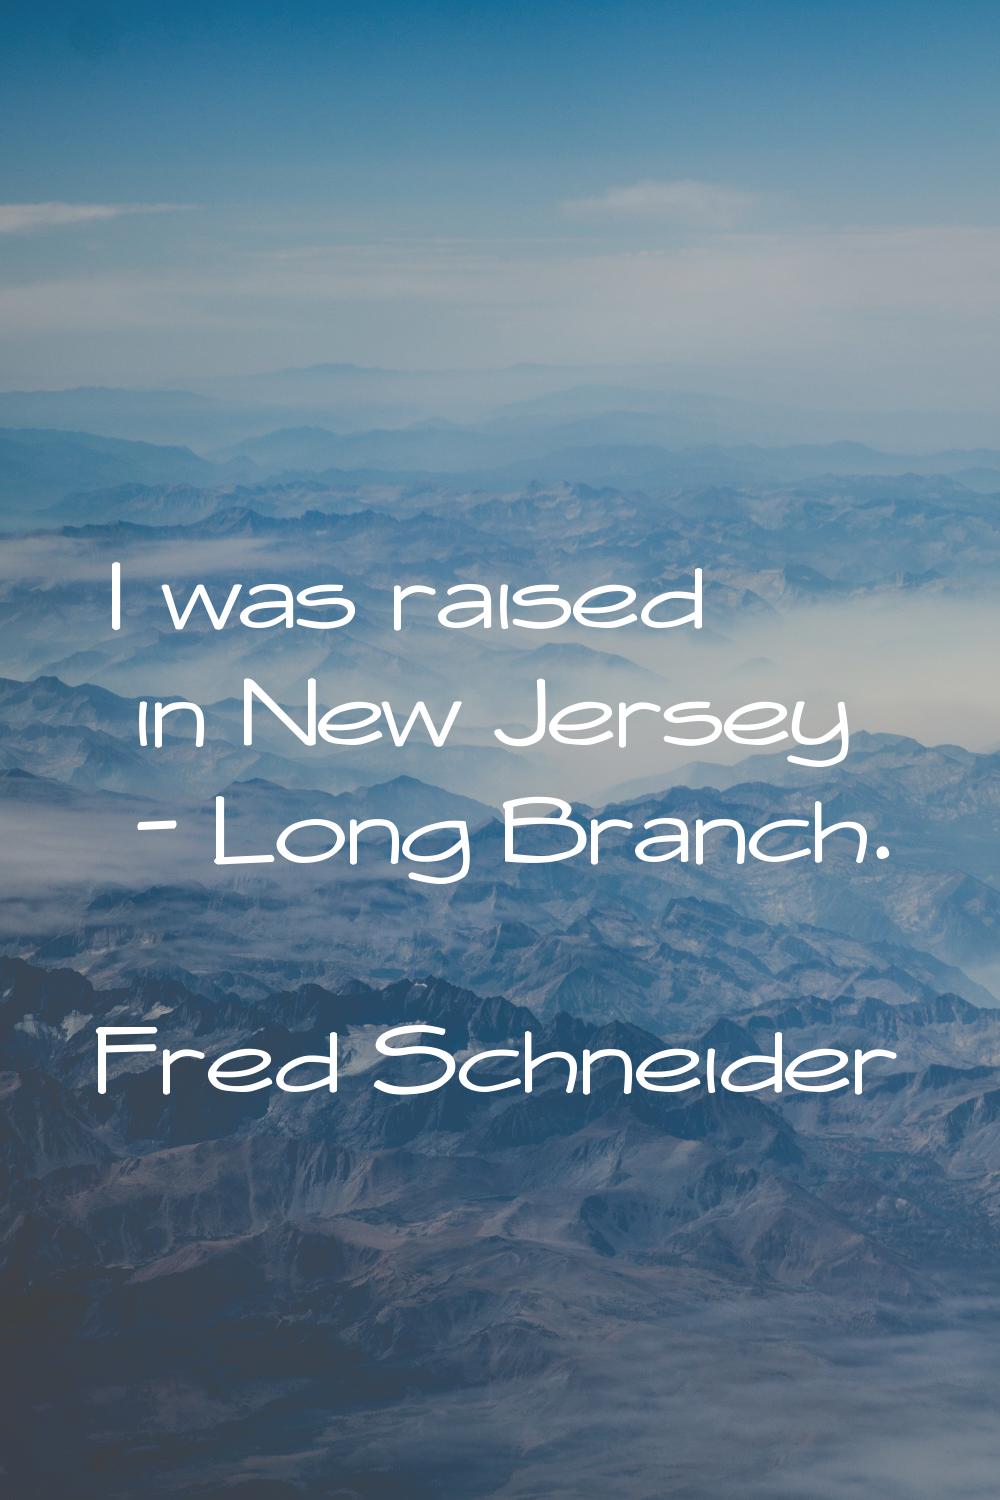 I was raised in New Jersey - Long Branch.